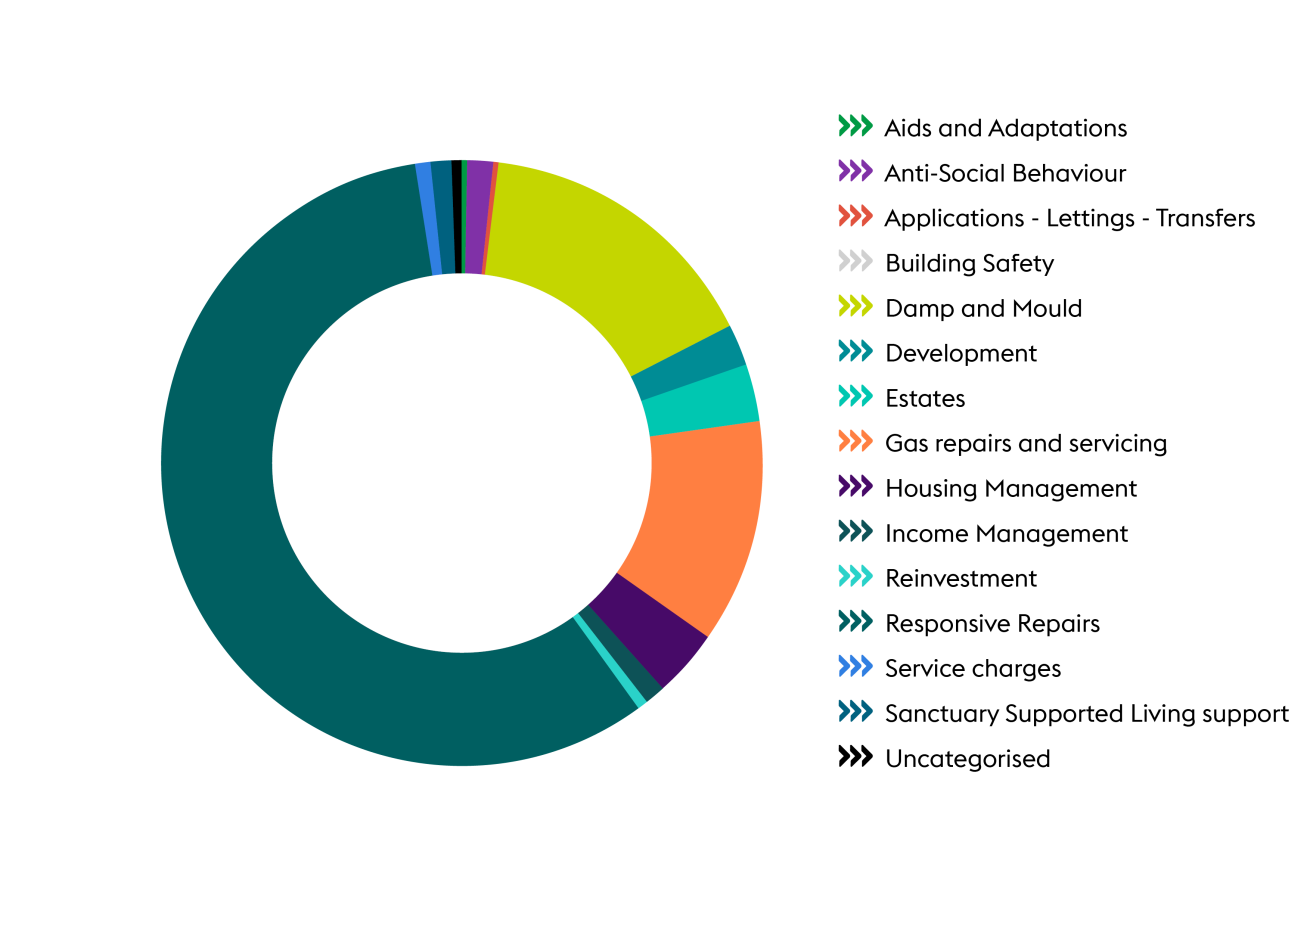 Pie chart showing the breakdown of types of complaint